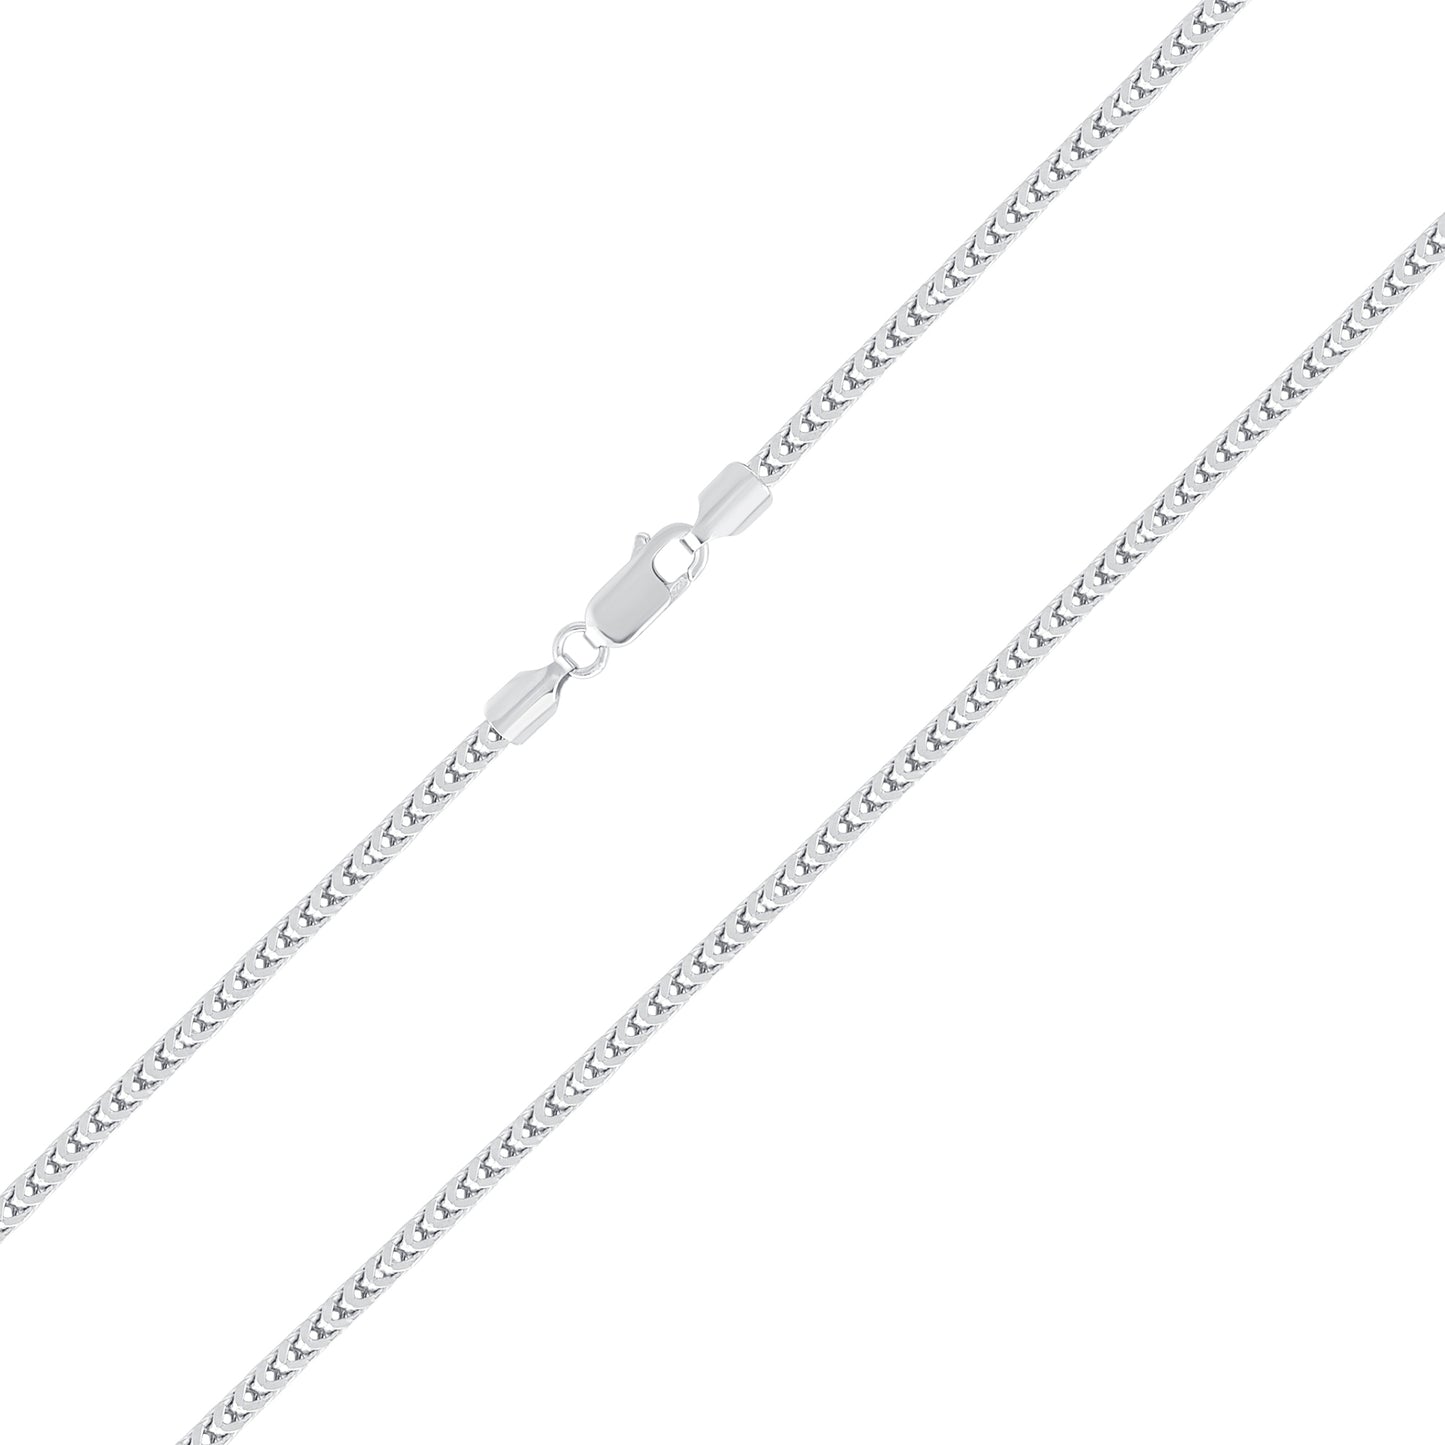 Silver 925 Rhodium Plated Franco Hollow Chain 3mm. FRANCOH070R